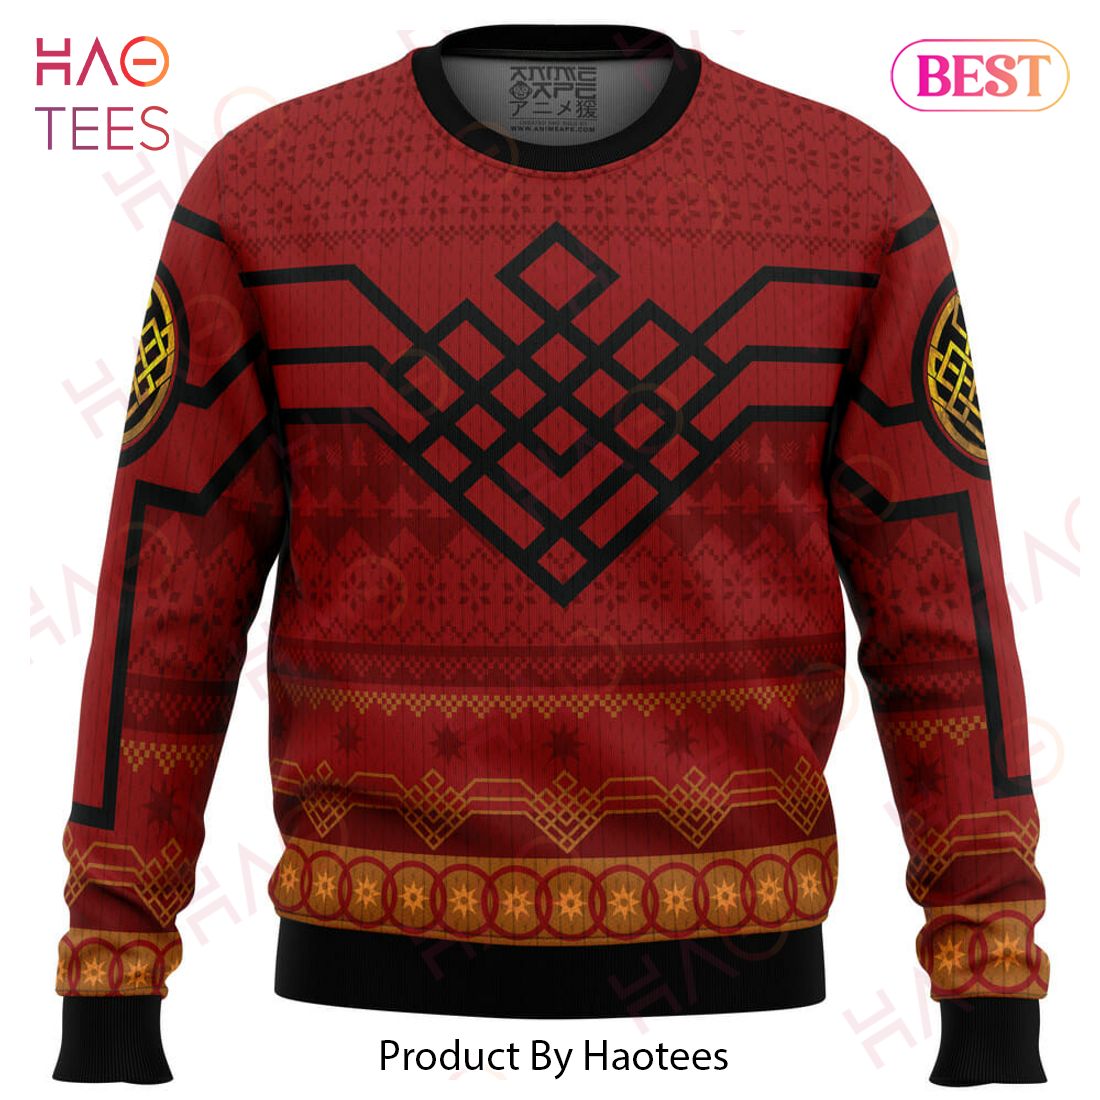 Ten Golden Rings Shang-Chi Marvel Ugly Christmas Sweater